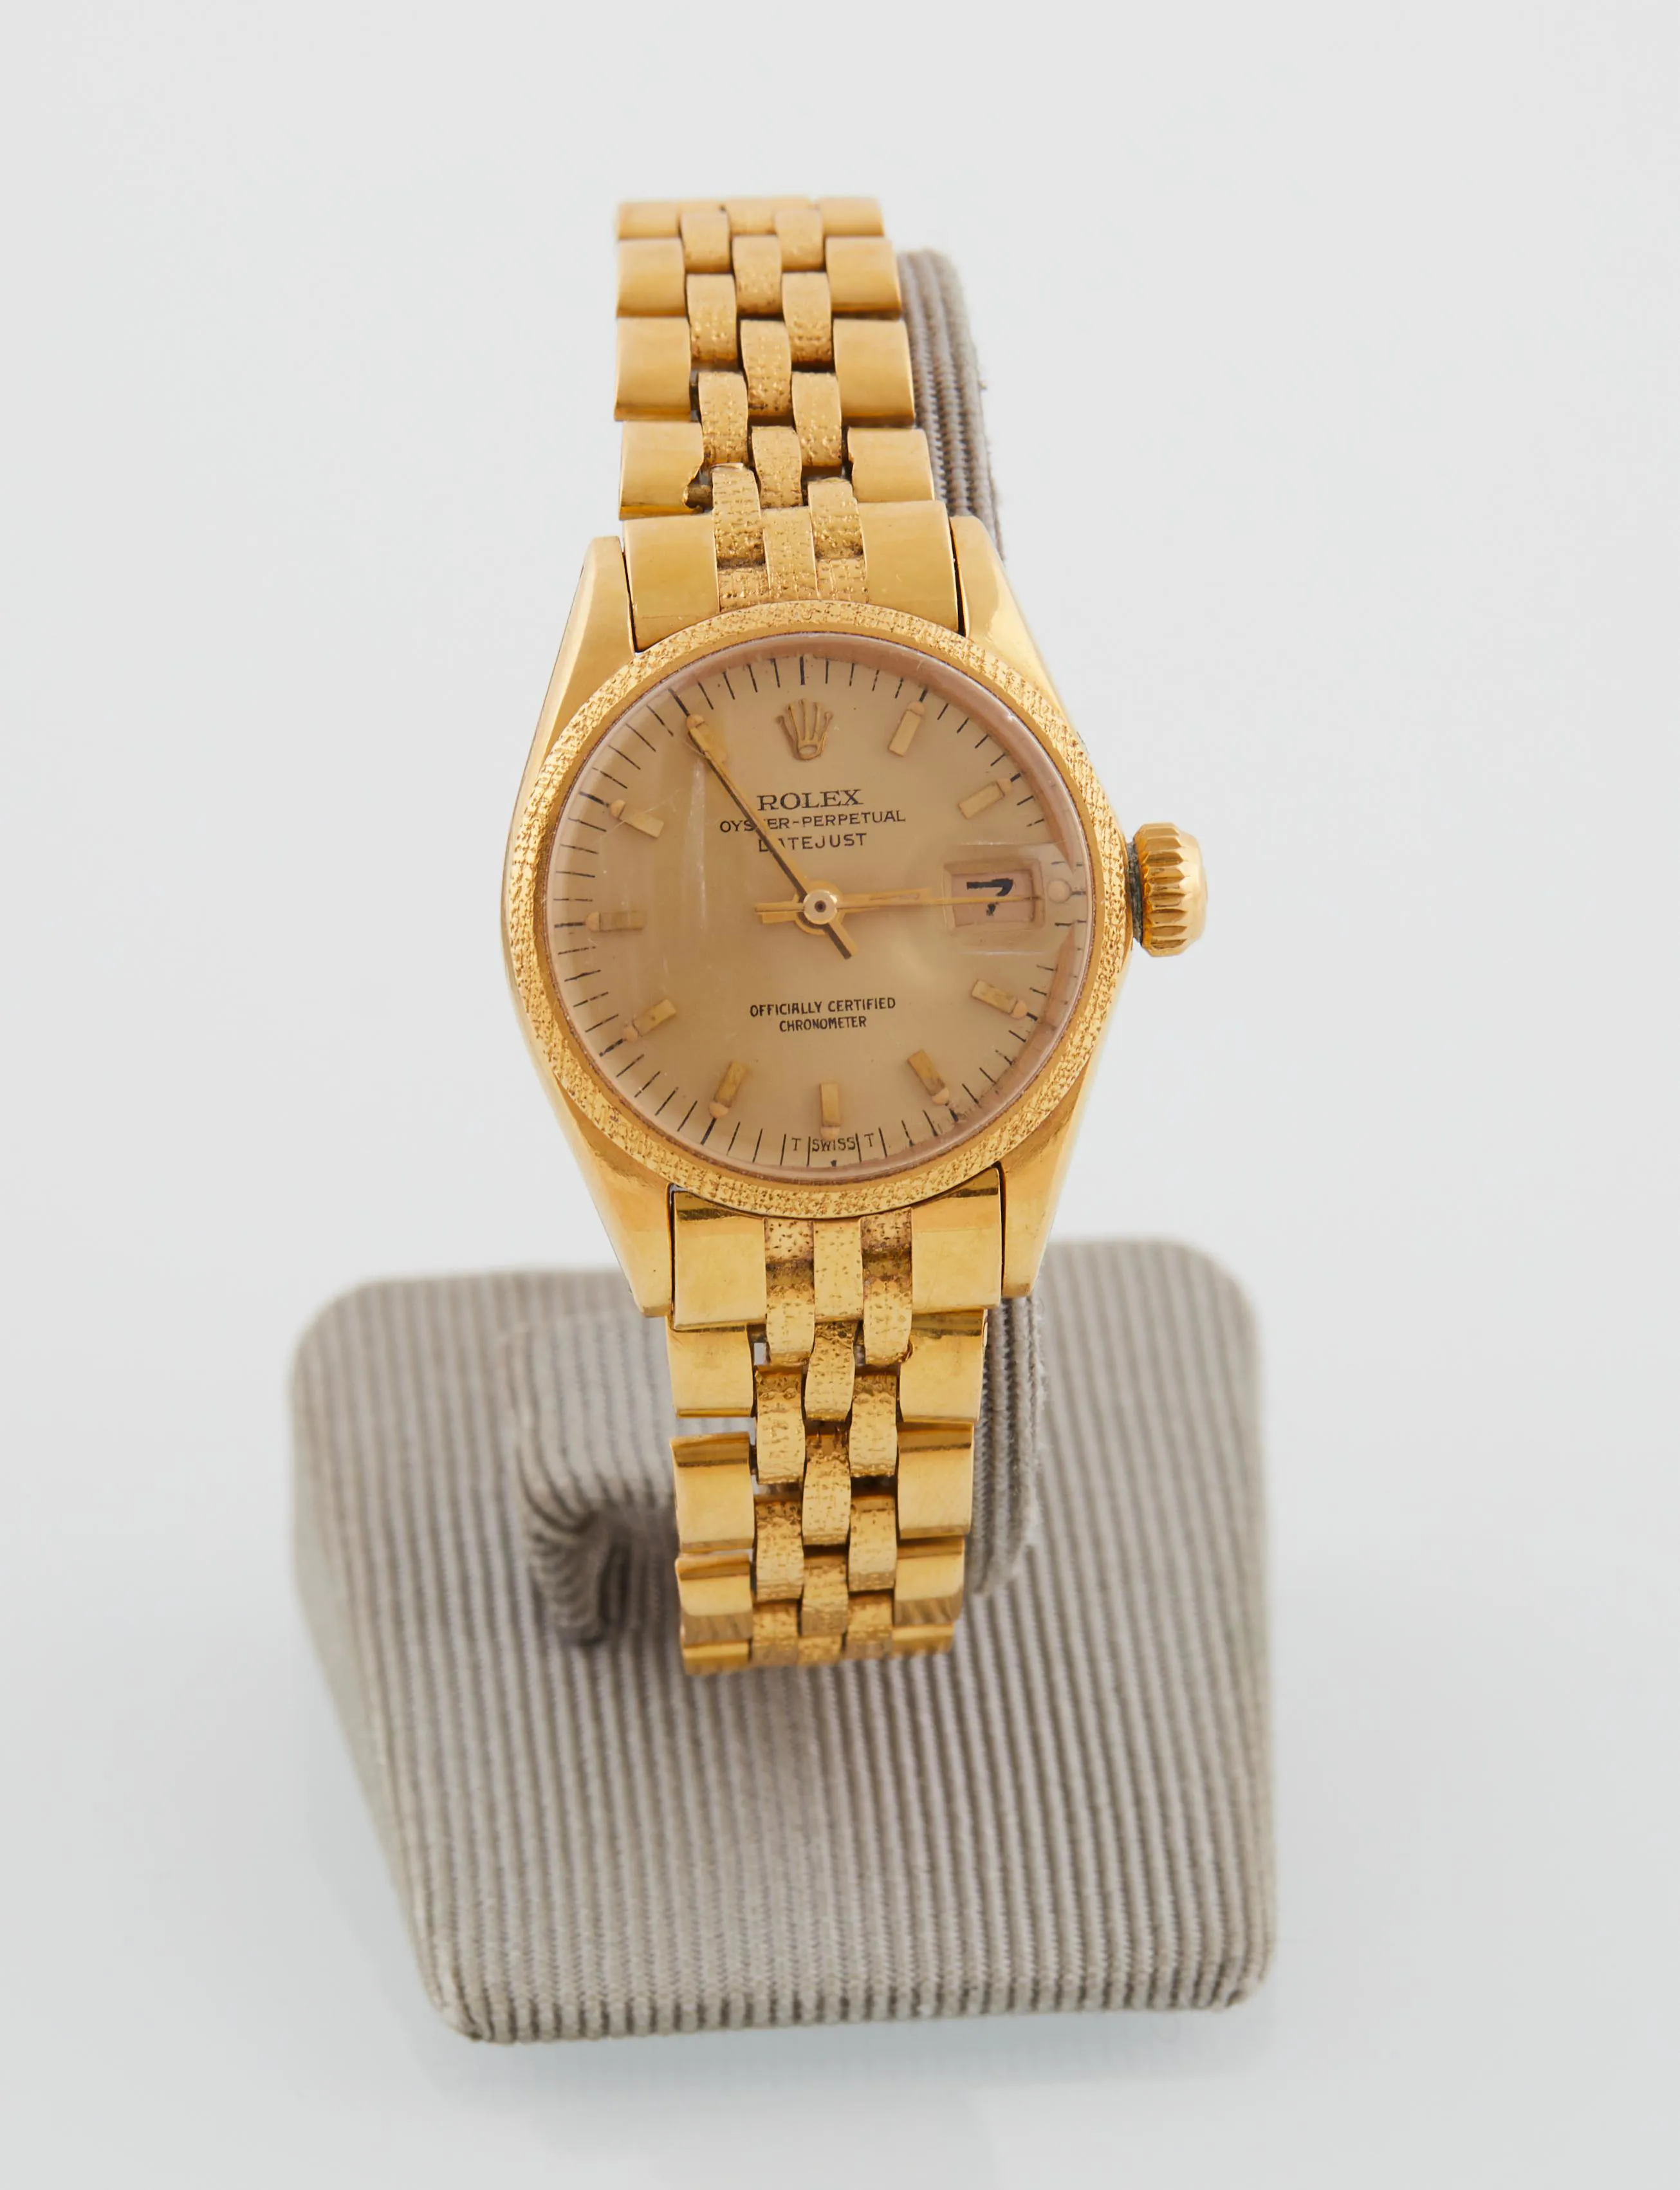 Rolex Oyster Perpetual Date 6517 24mm Yellow gold Gold